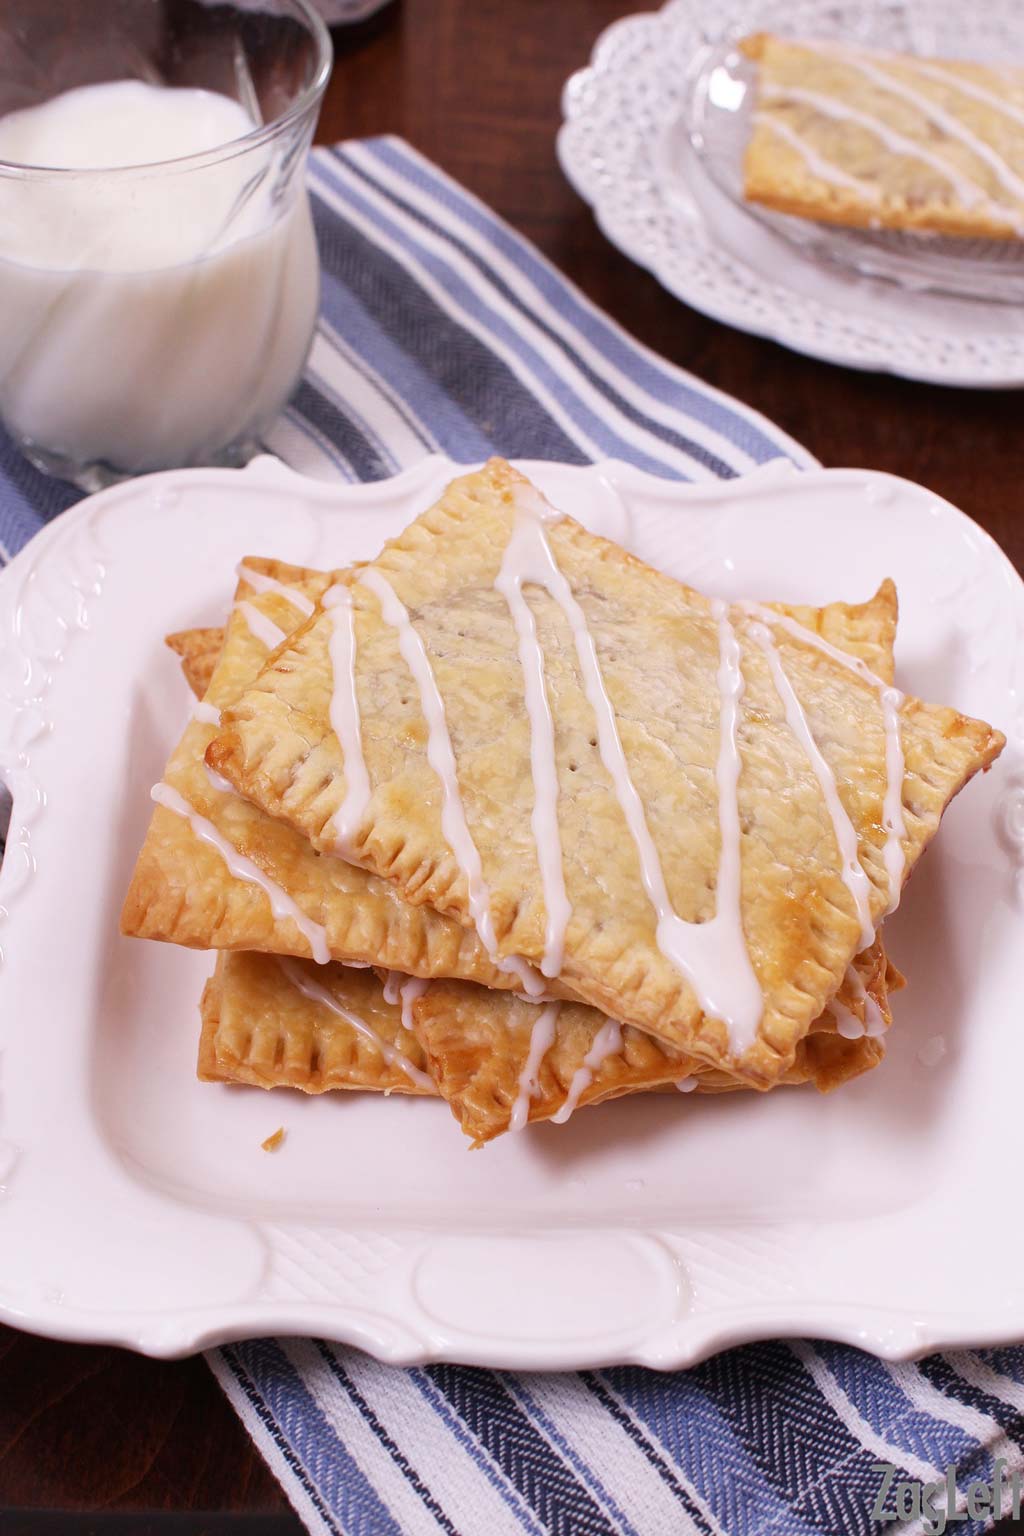 A stack of four homemade toaster pastries on a plate next to a glass of milk.